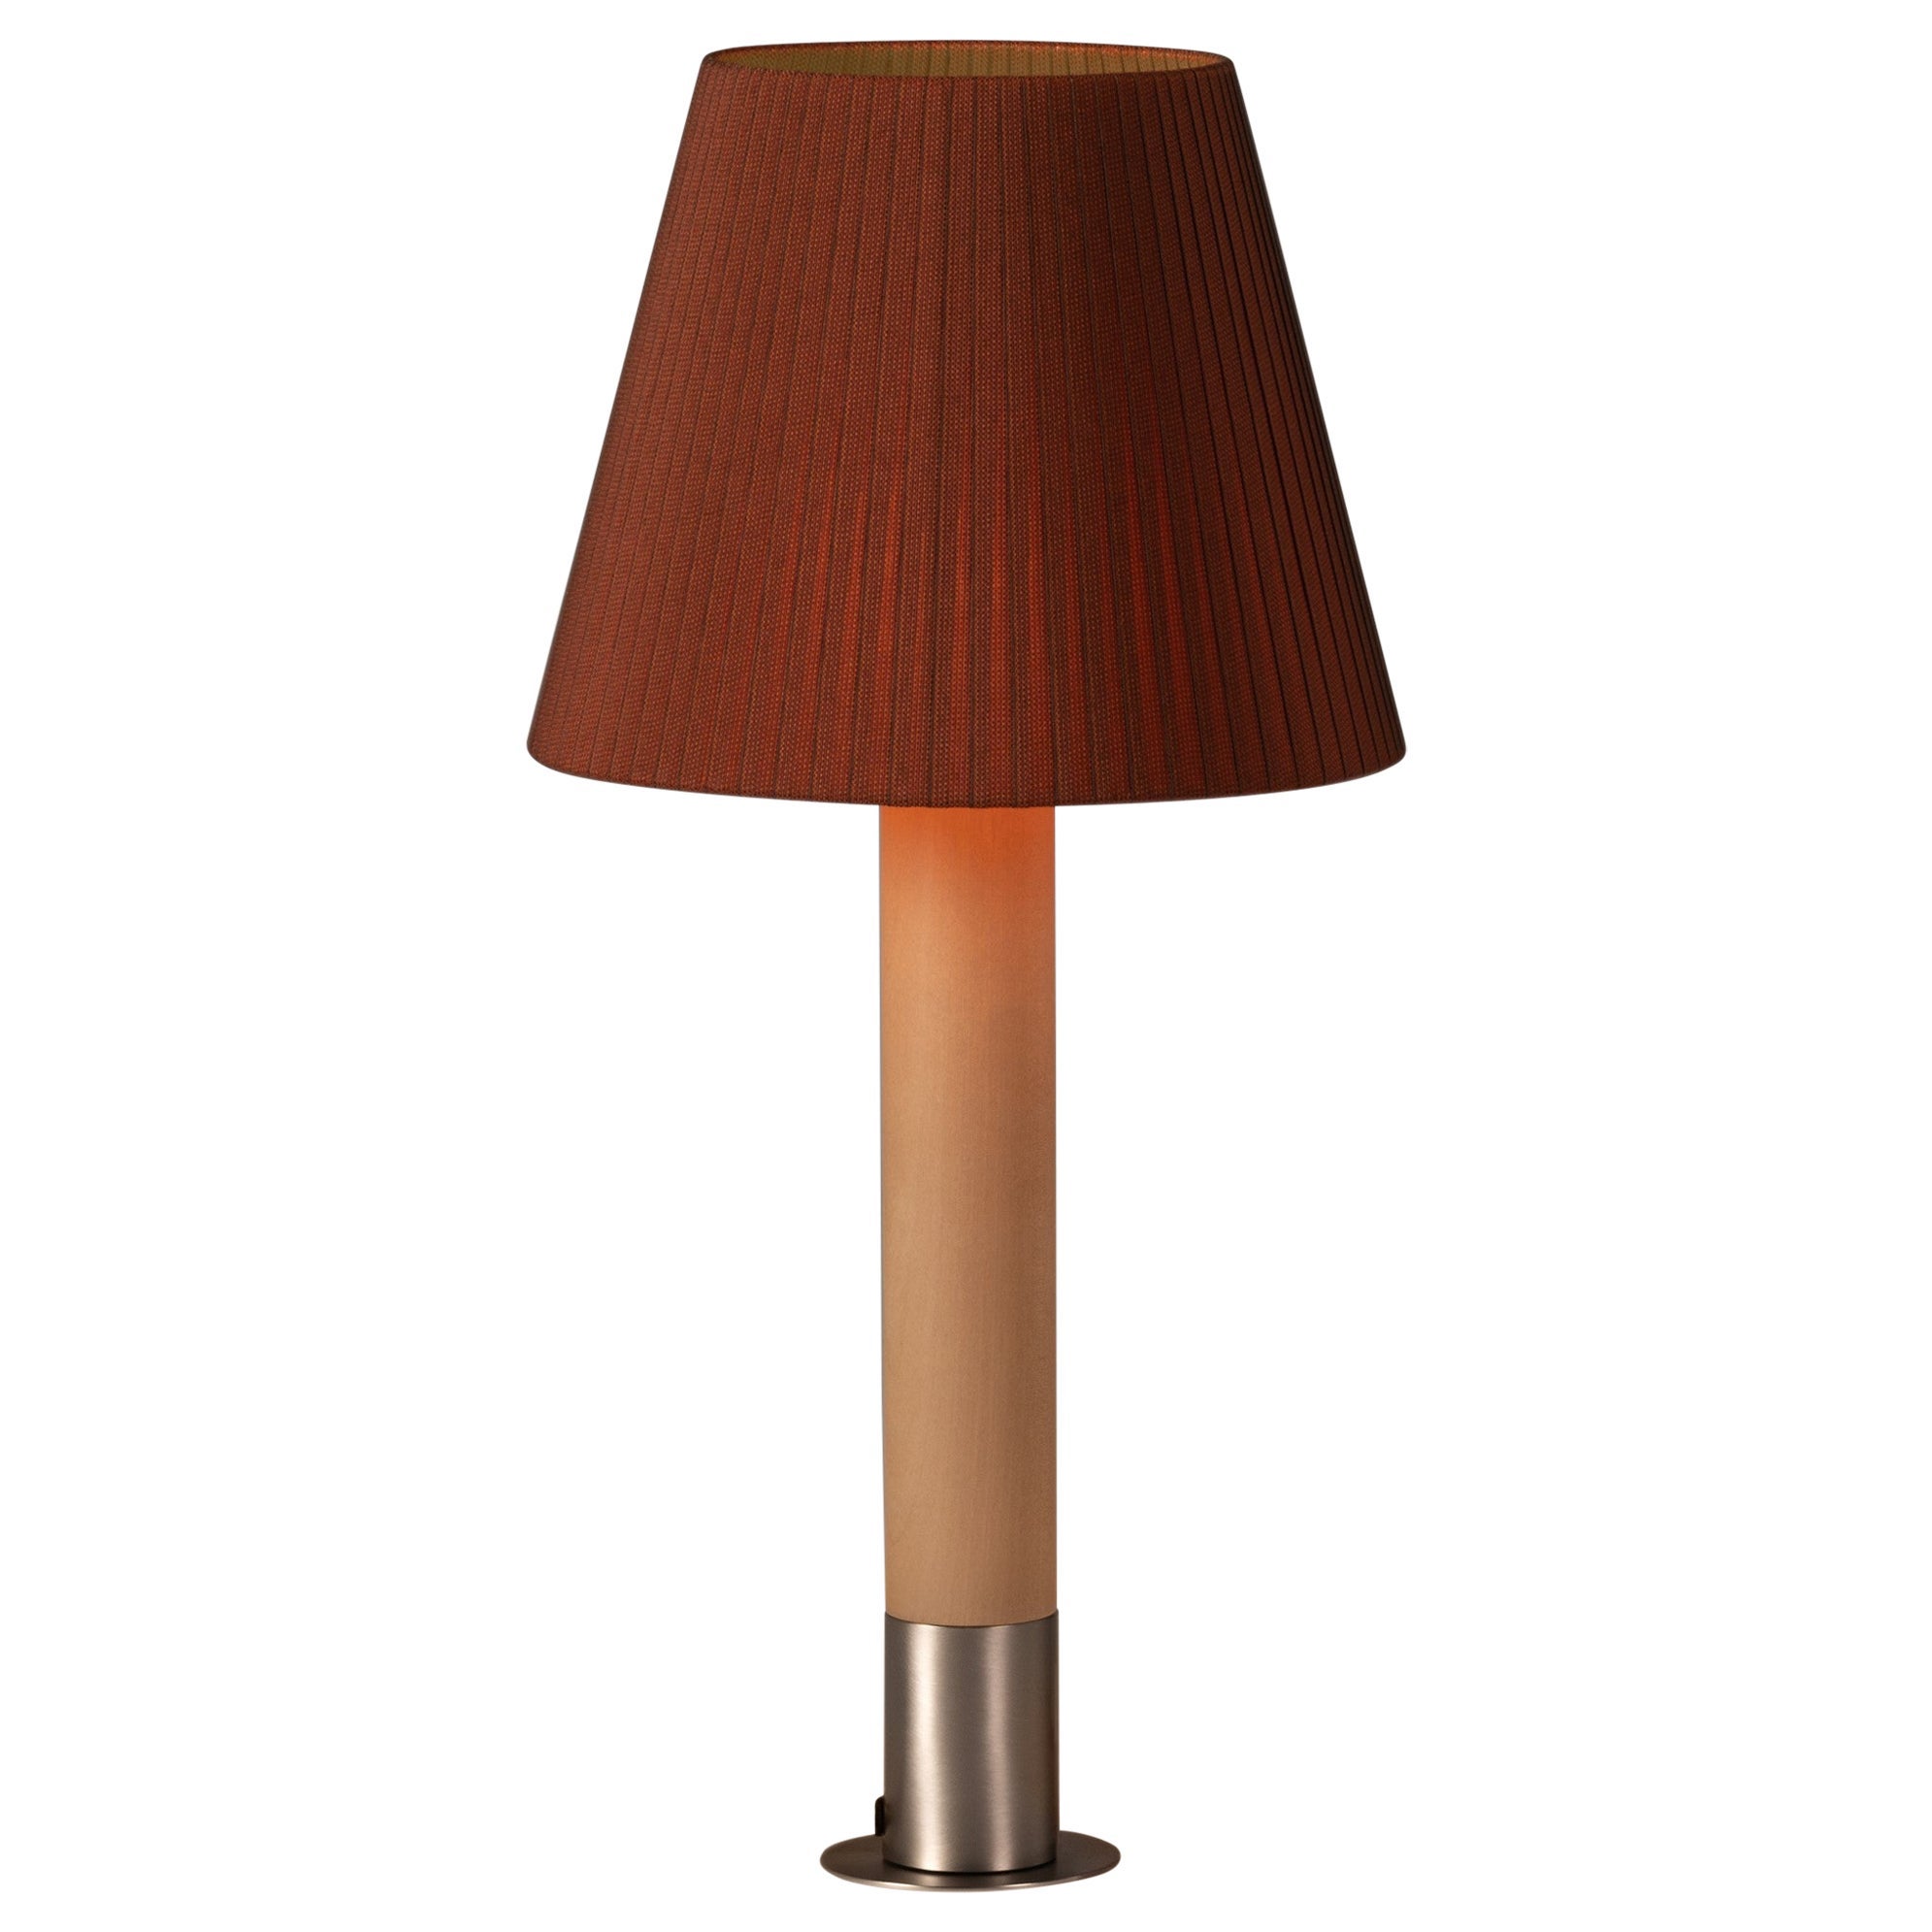 Nickel and Terracotta Básica M1 Table Lamp by Santiago Roqueta, Santa & Cole For Sale